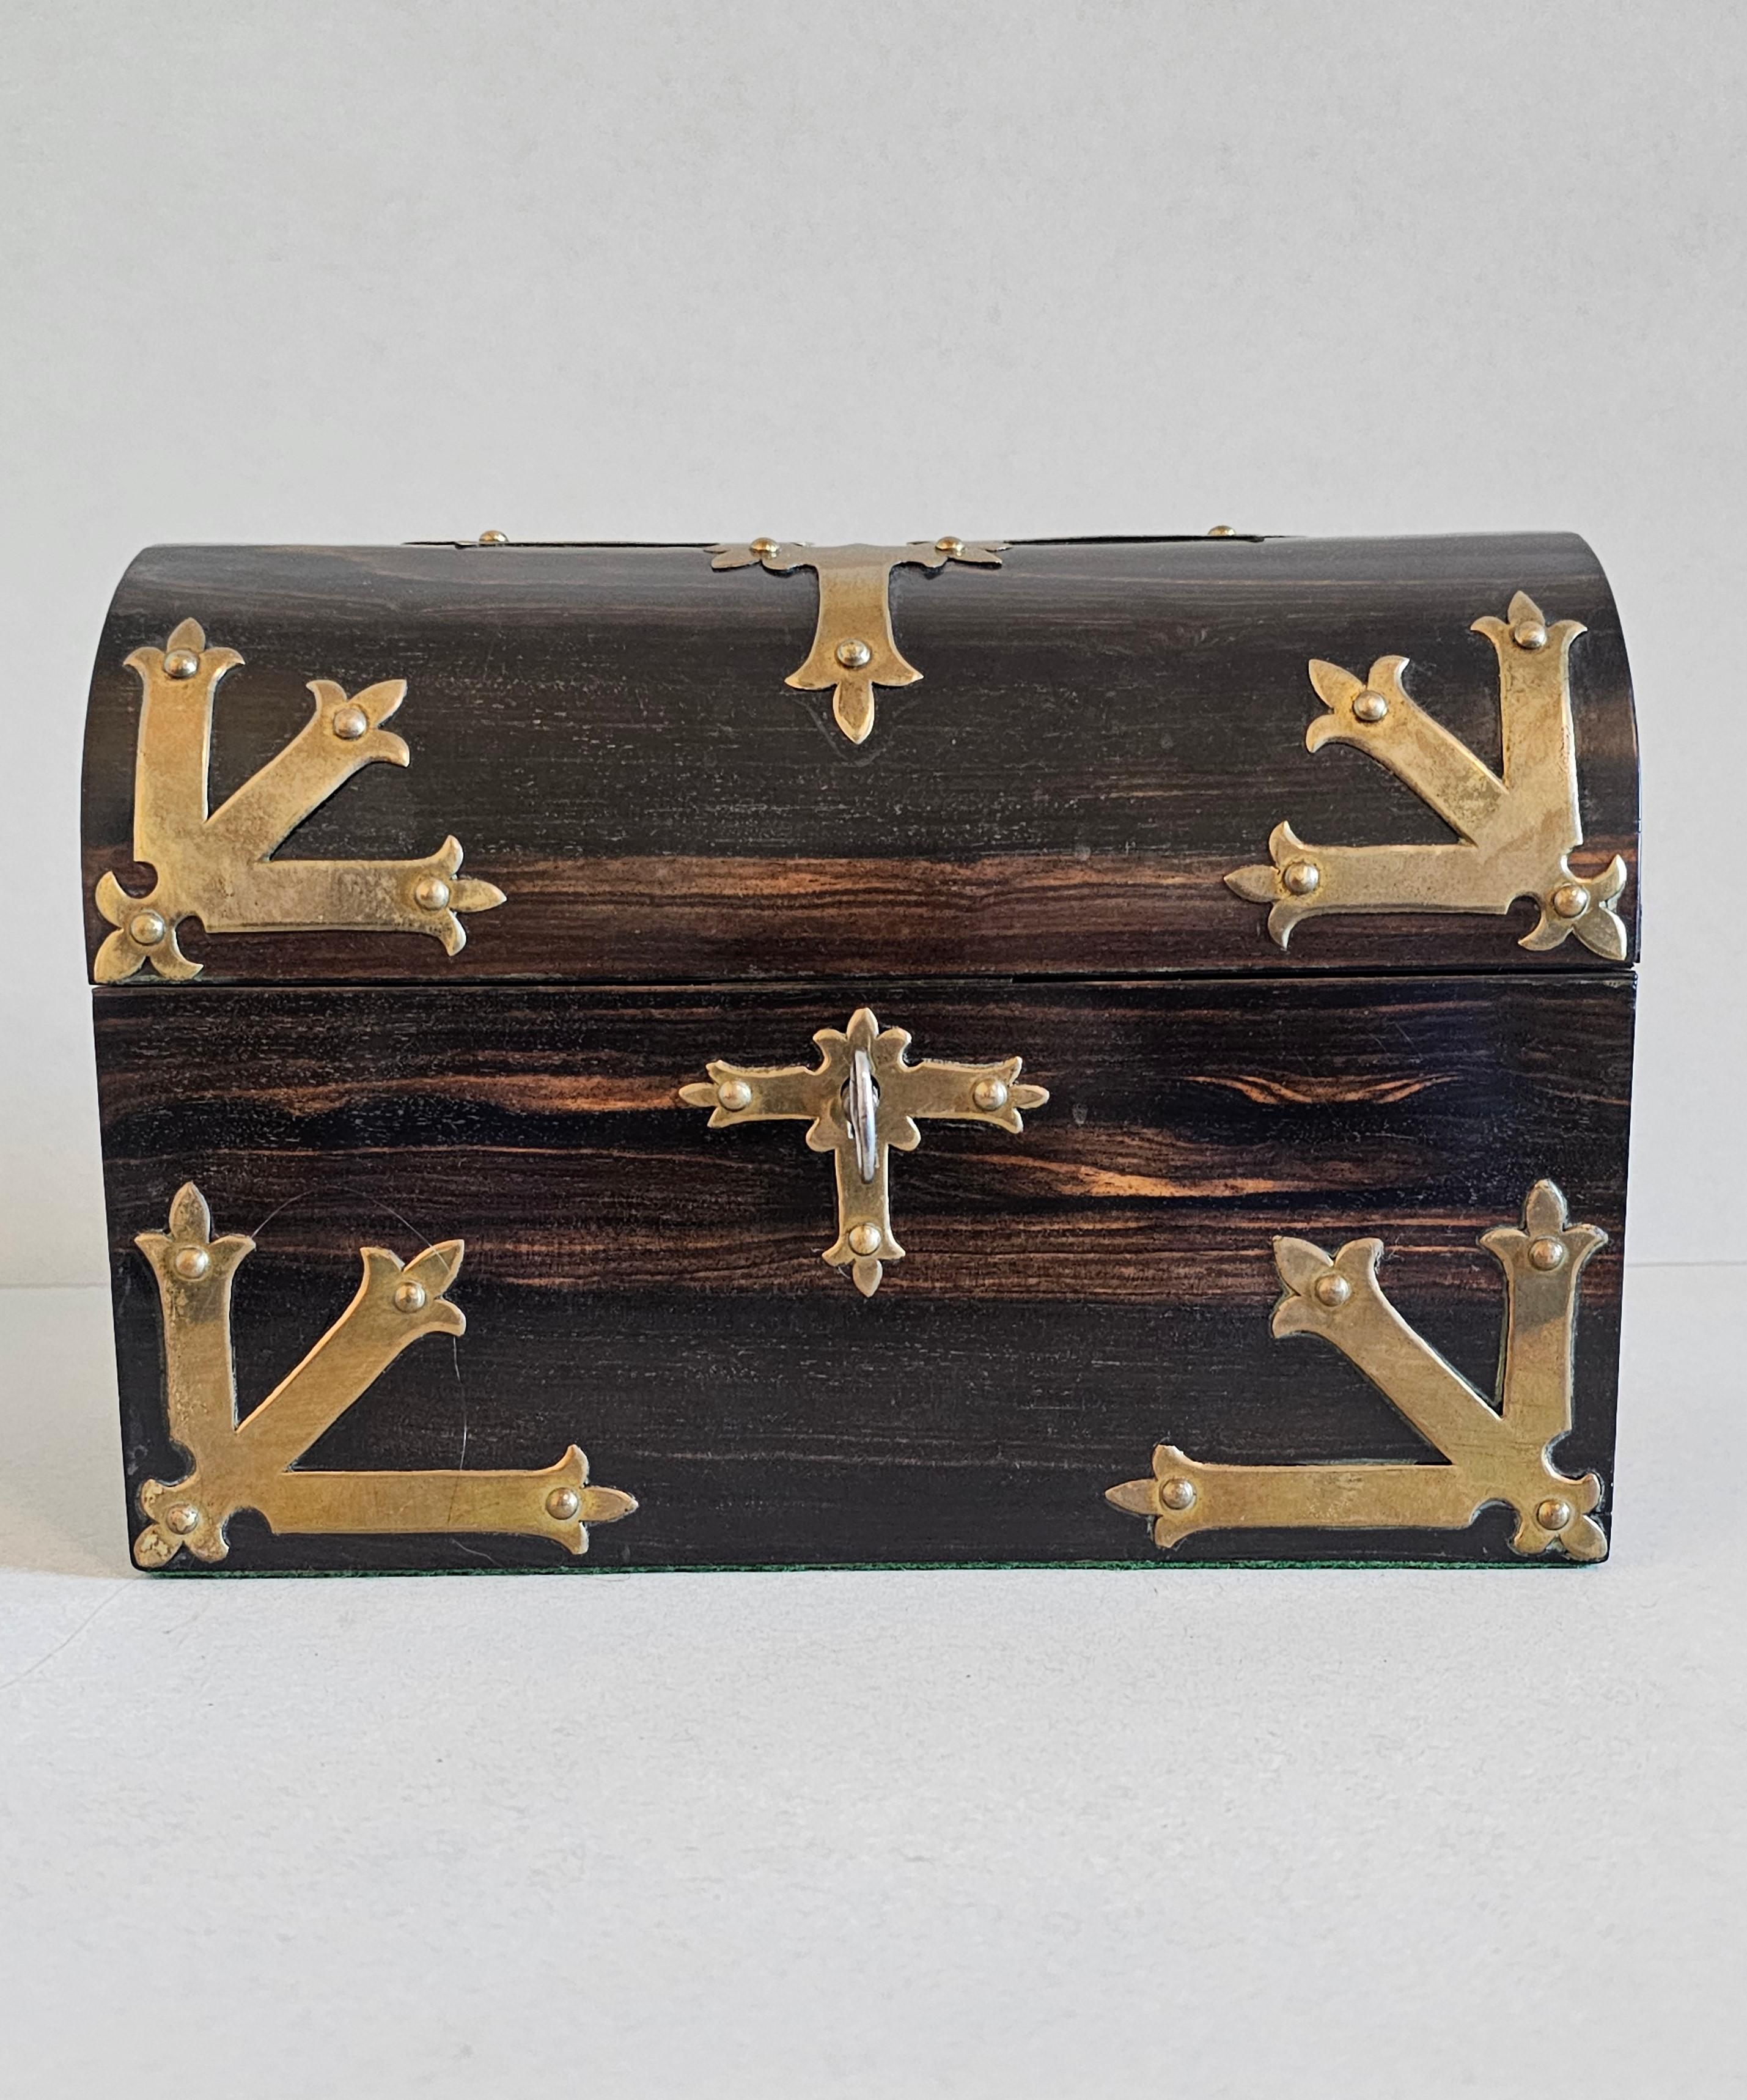 A stunning very fine quality antique English stationary box in striking exotic hardwood coromandel / madagascar ebony. circa 1880

Exquisitely hand-crafted in England in the 19th century, attributed to one of London's finest decorative box, tea